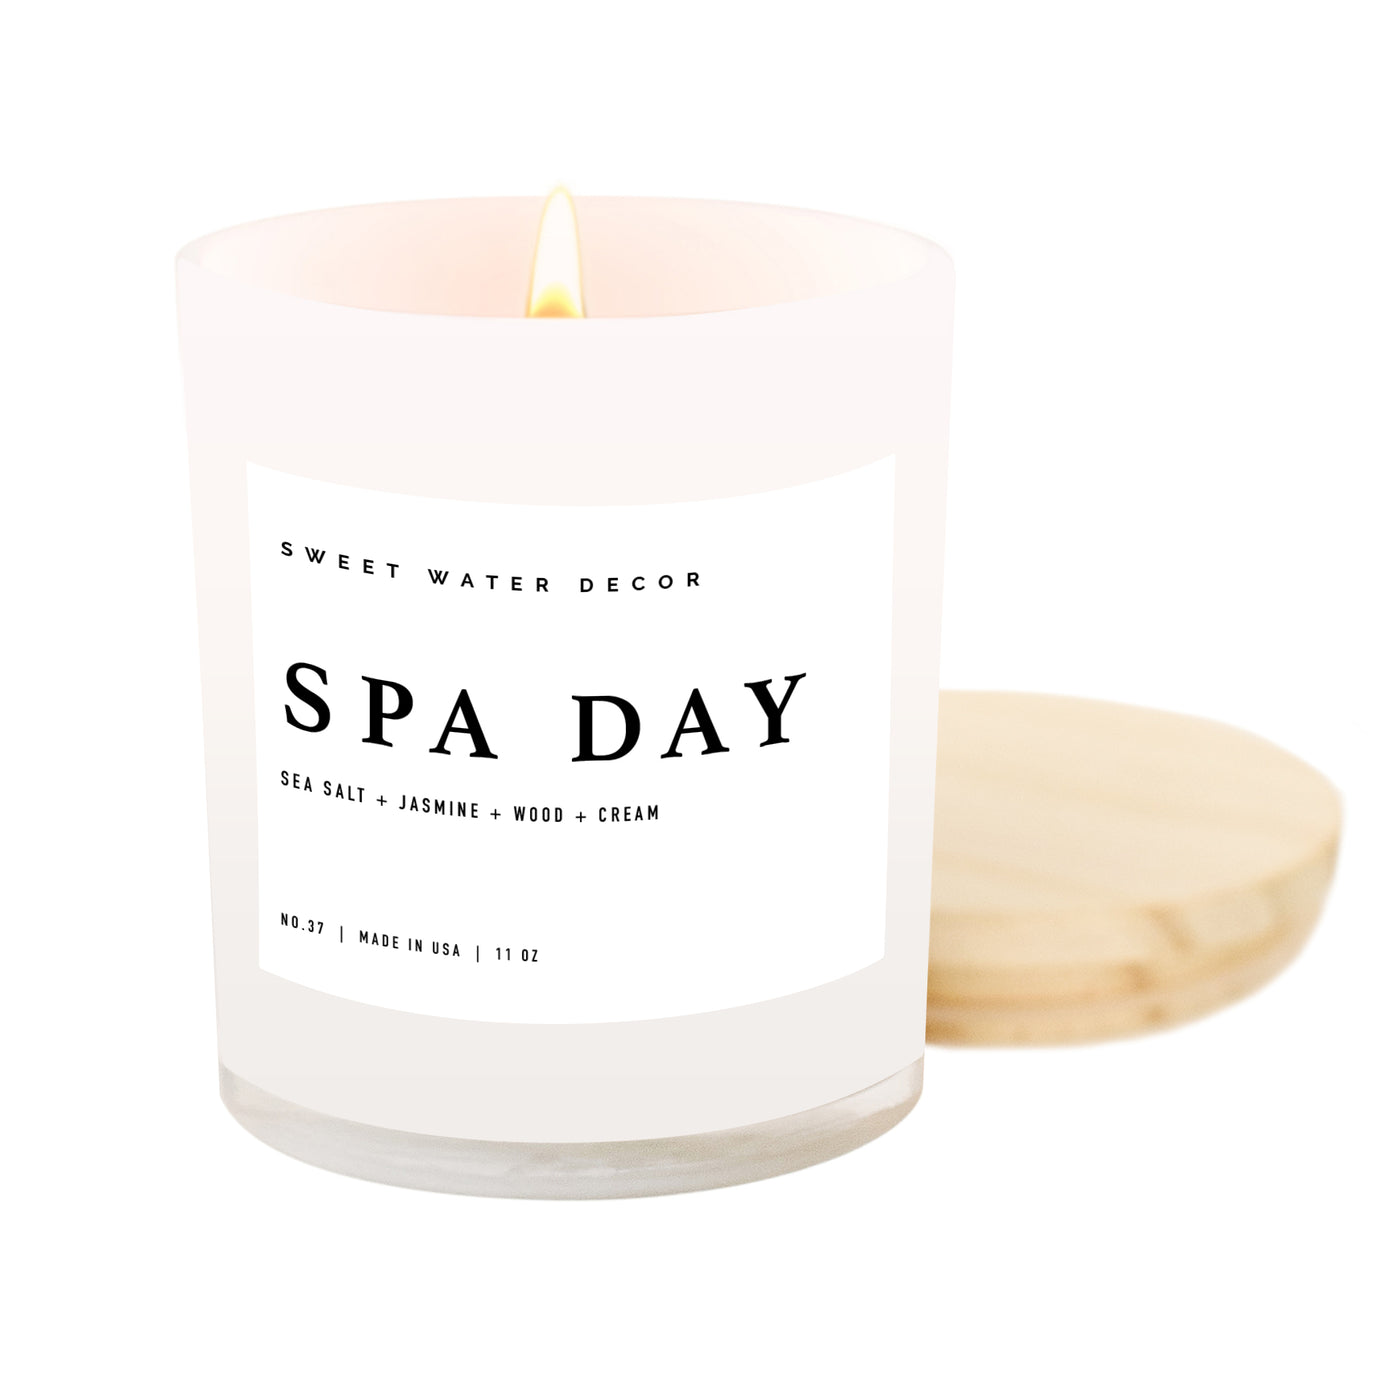 Spa Day Soy Candle - White Jar - 11 oz - Sweet Water Decor - Candles